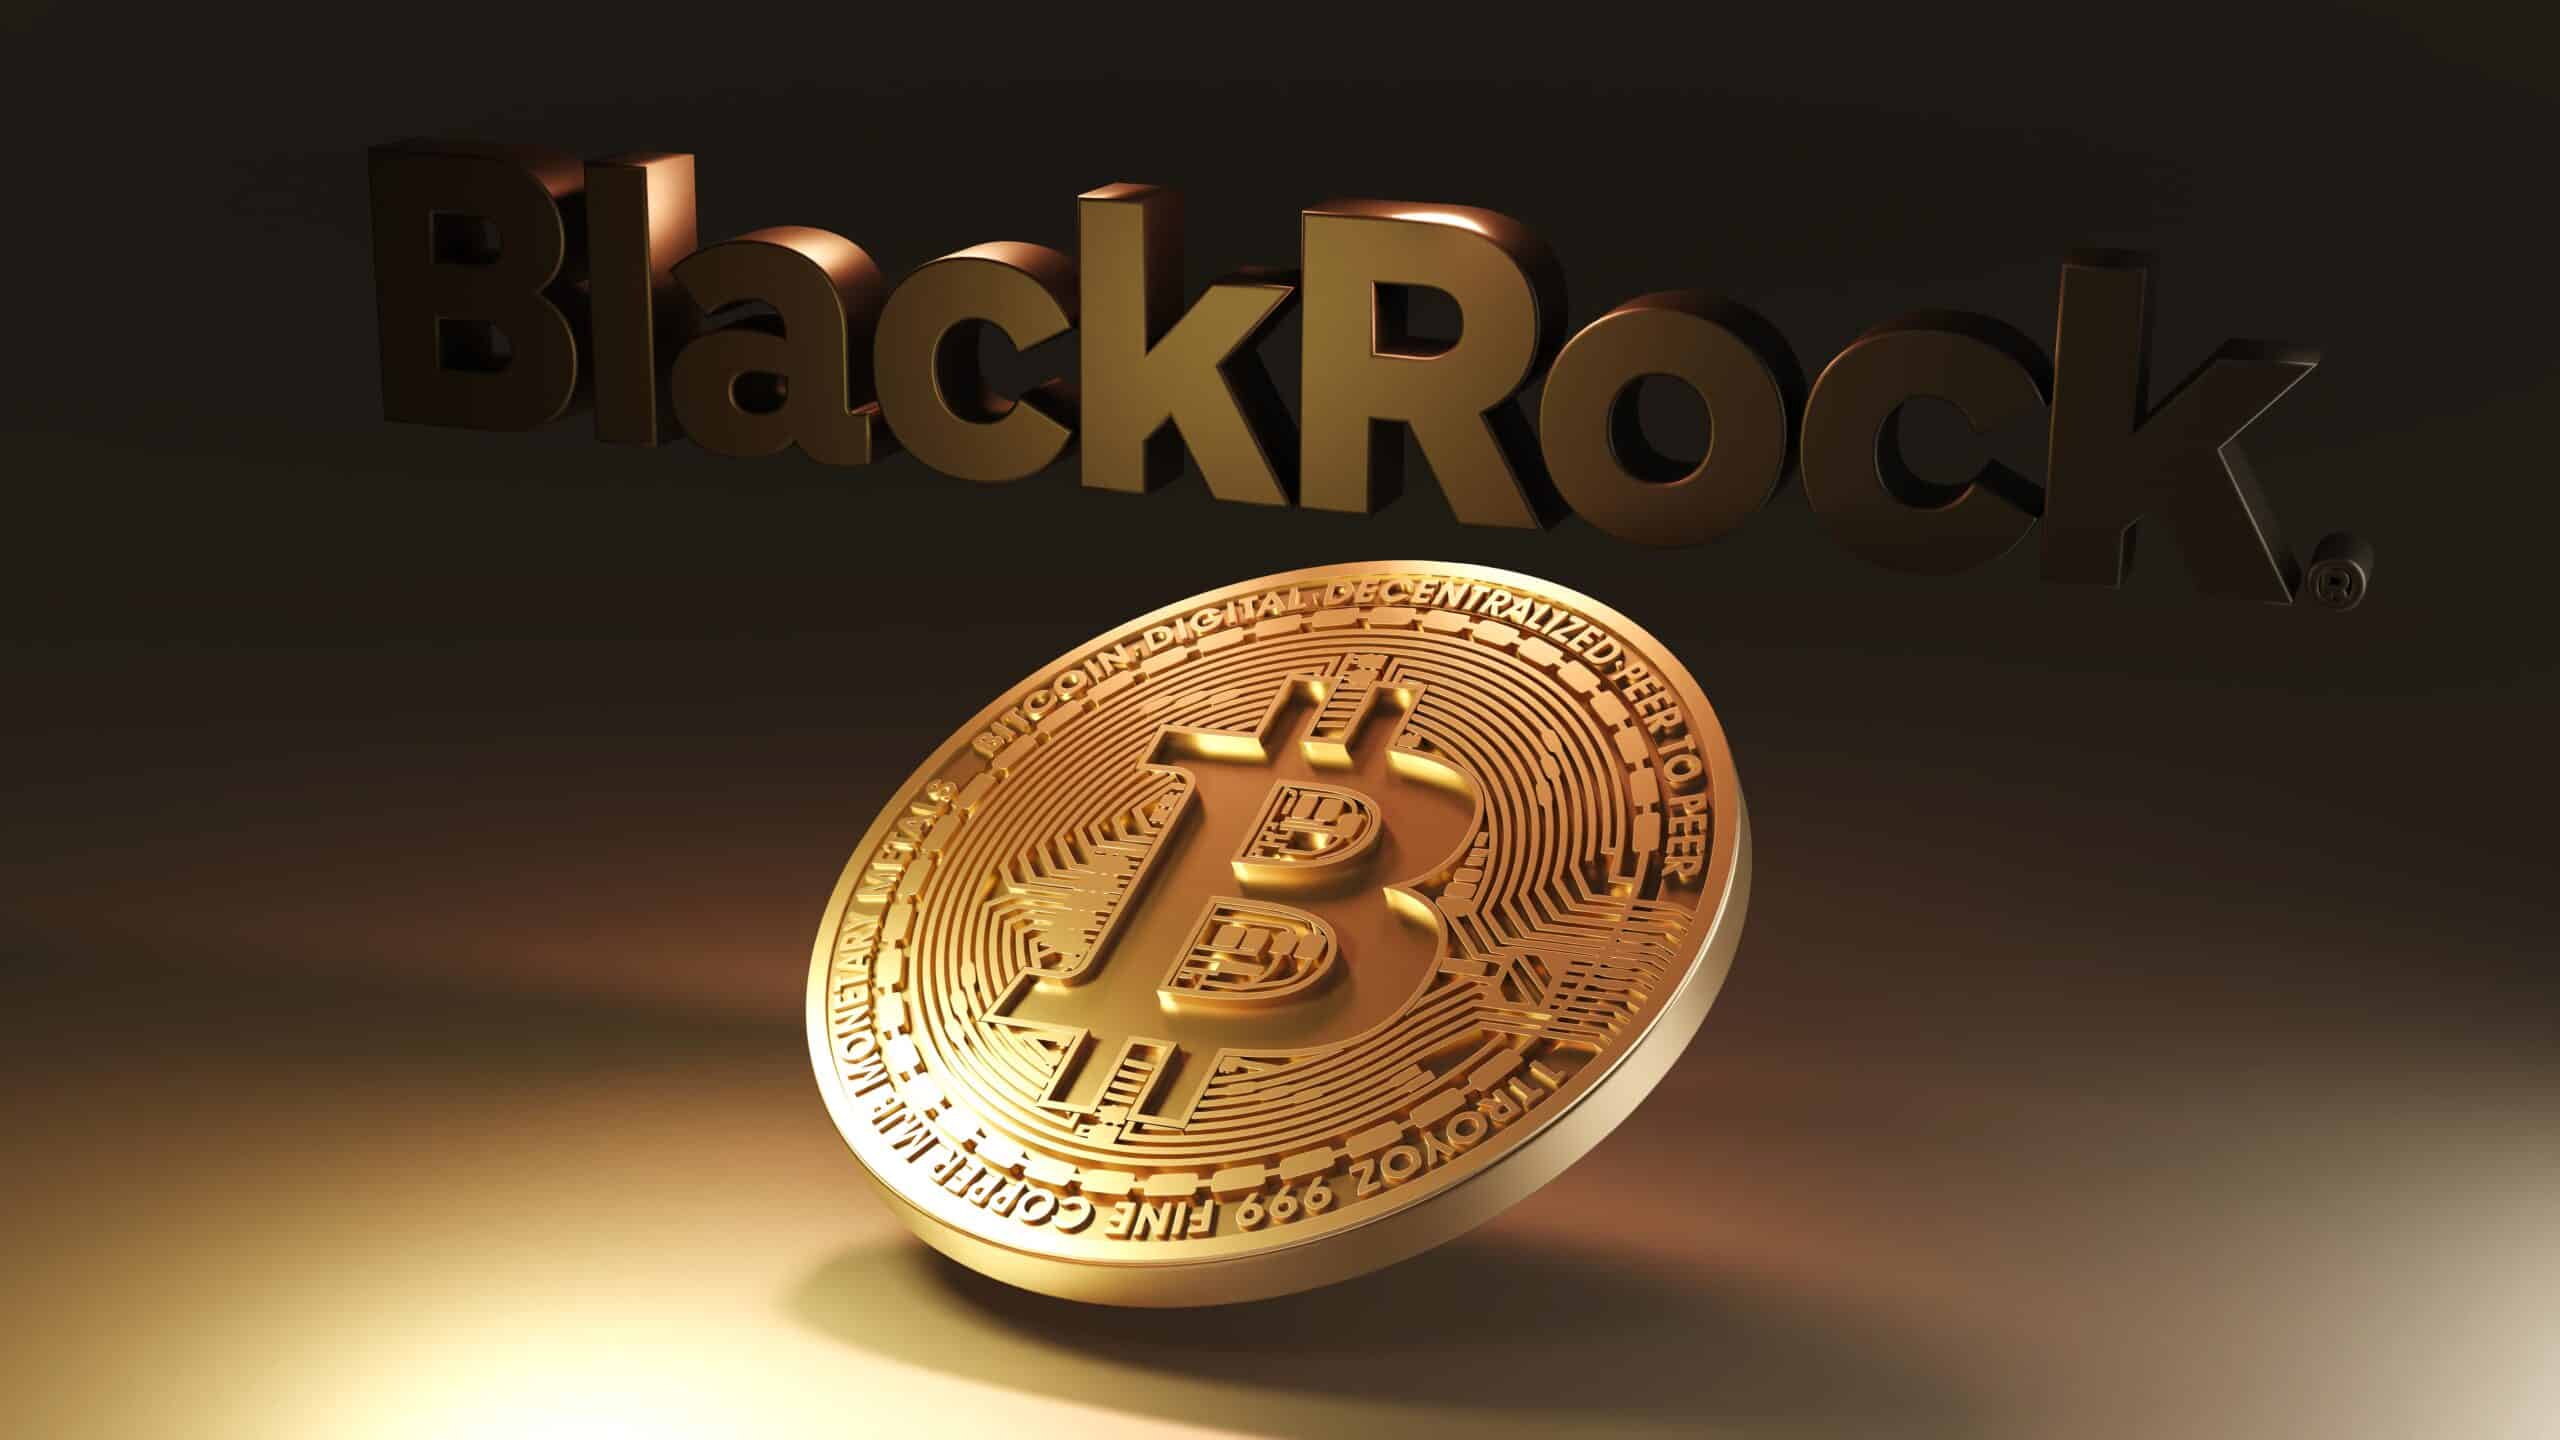 blackrock logo in background with a gold bitcoin in the foreground